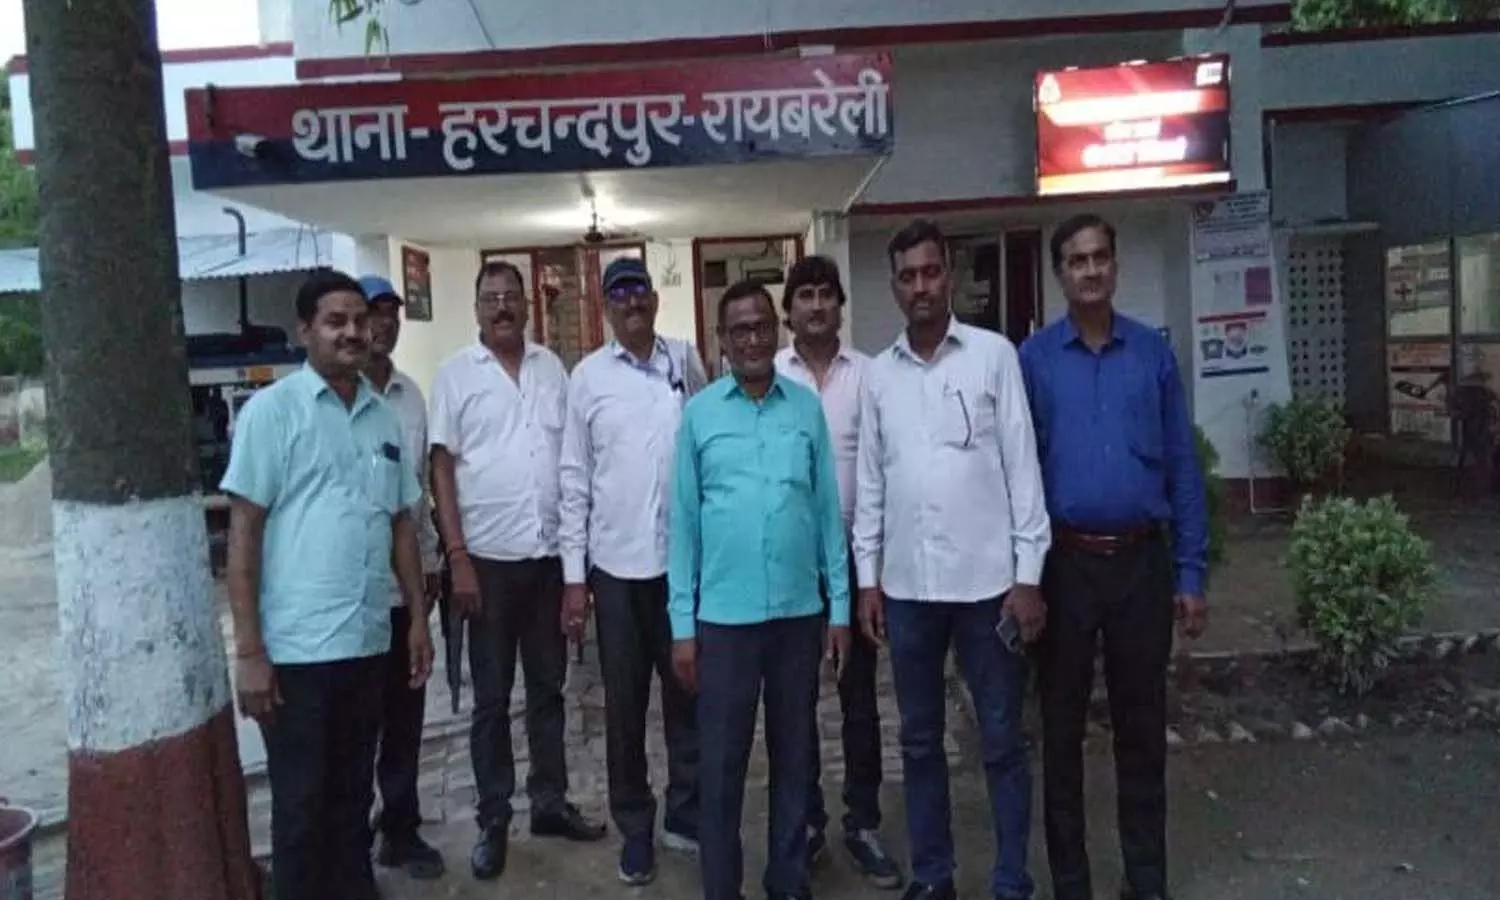 In Rae Bareli, the Principal Assistant was arrested by the Vigilance Team of Anti Corruption, caught taking bribe